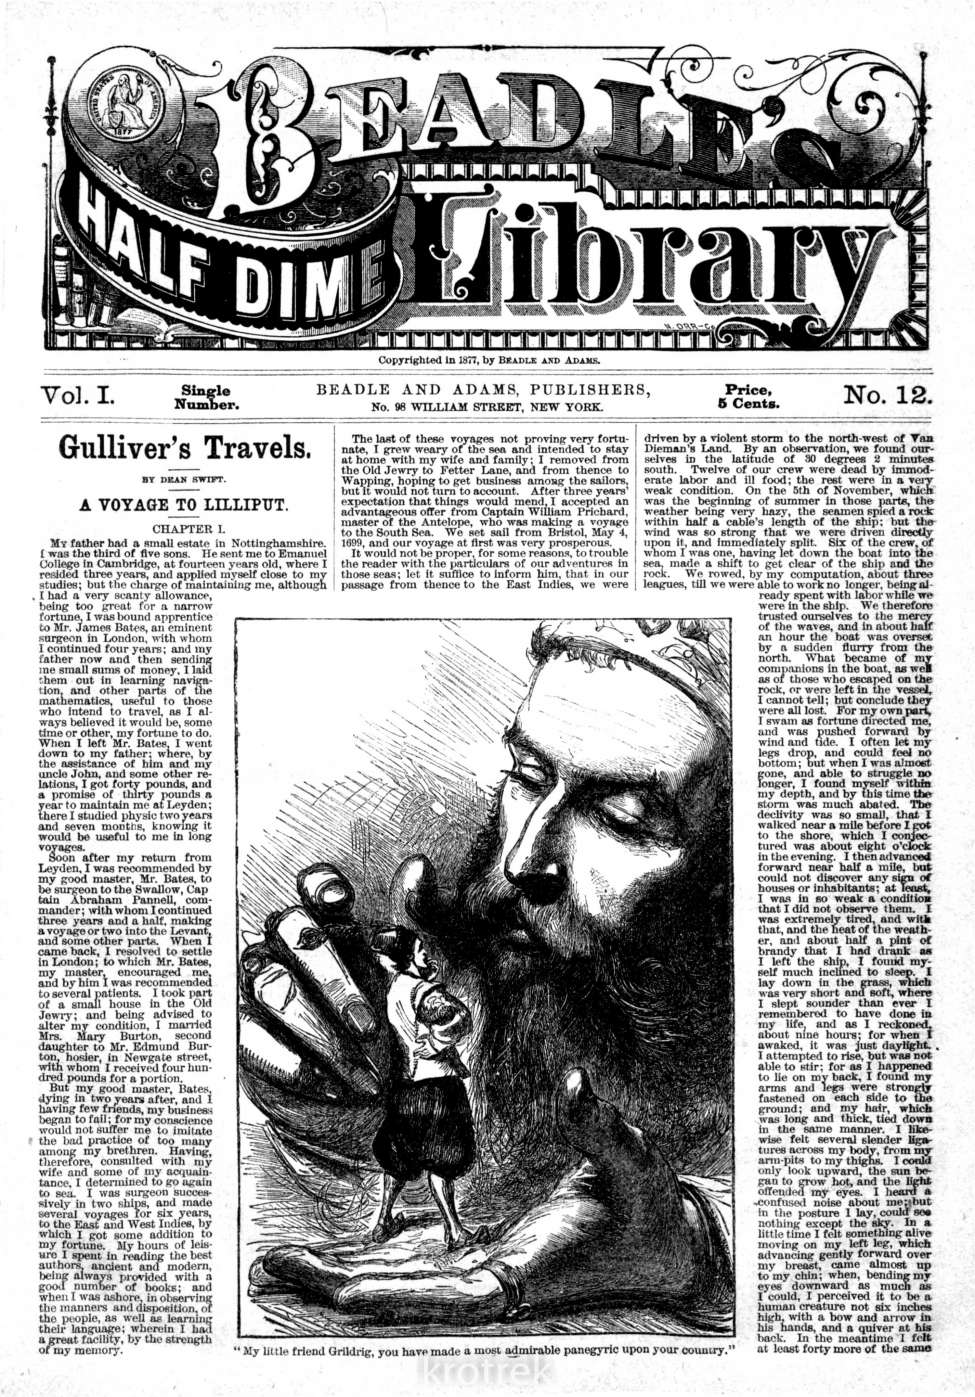 Book Cover For Beadle's Half Dime Library 12 - Gulliver's Travels